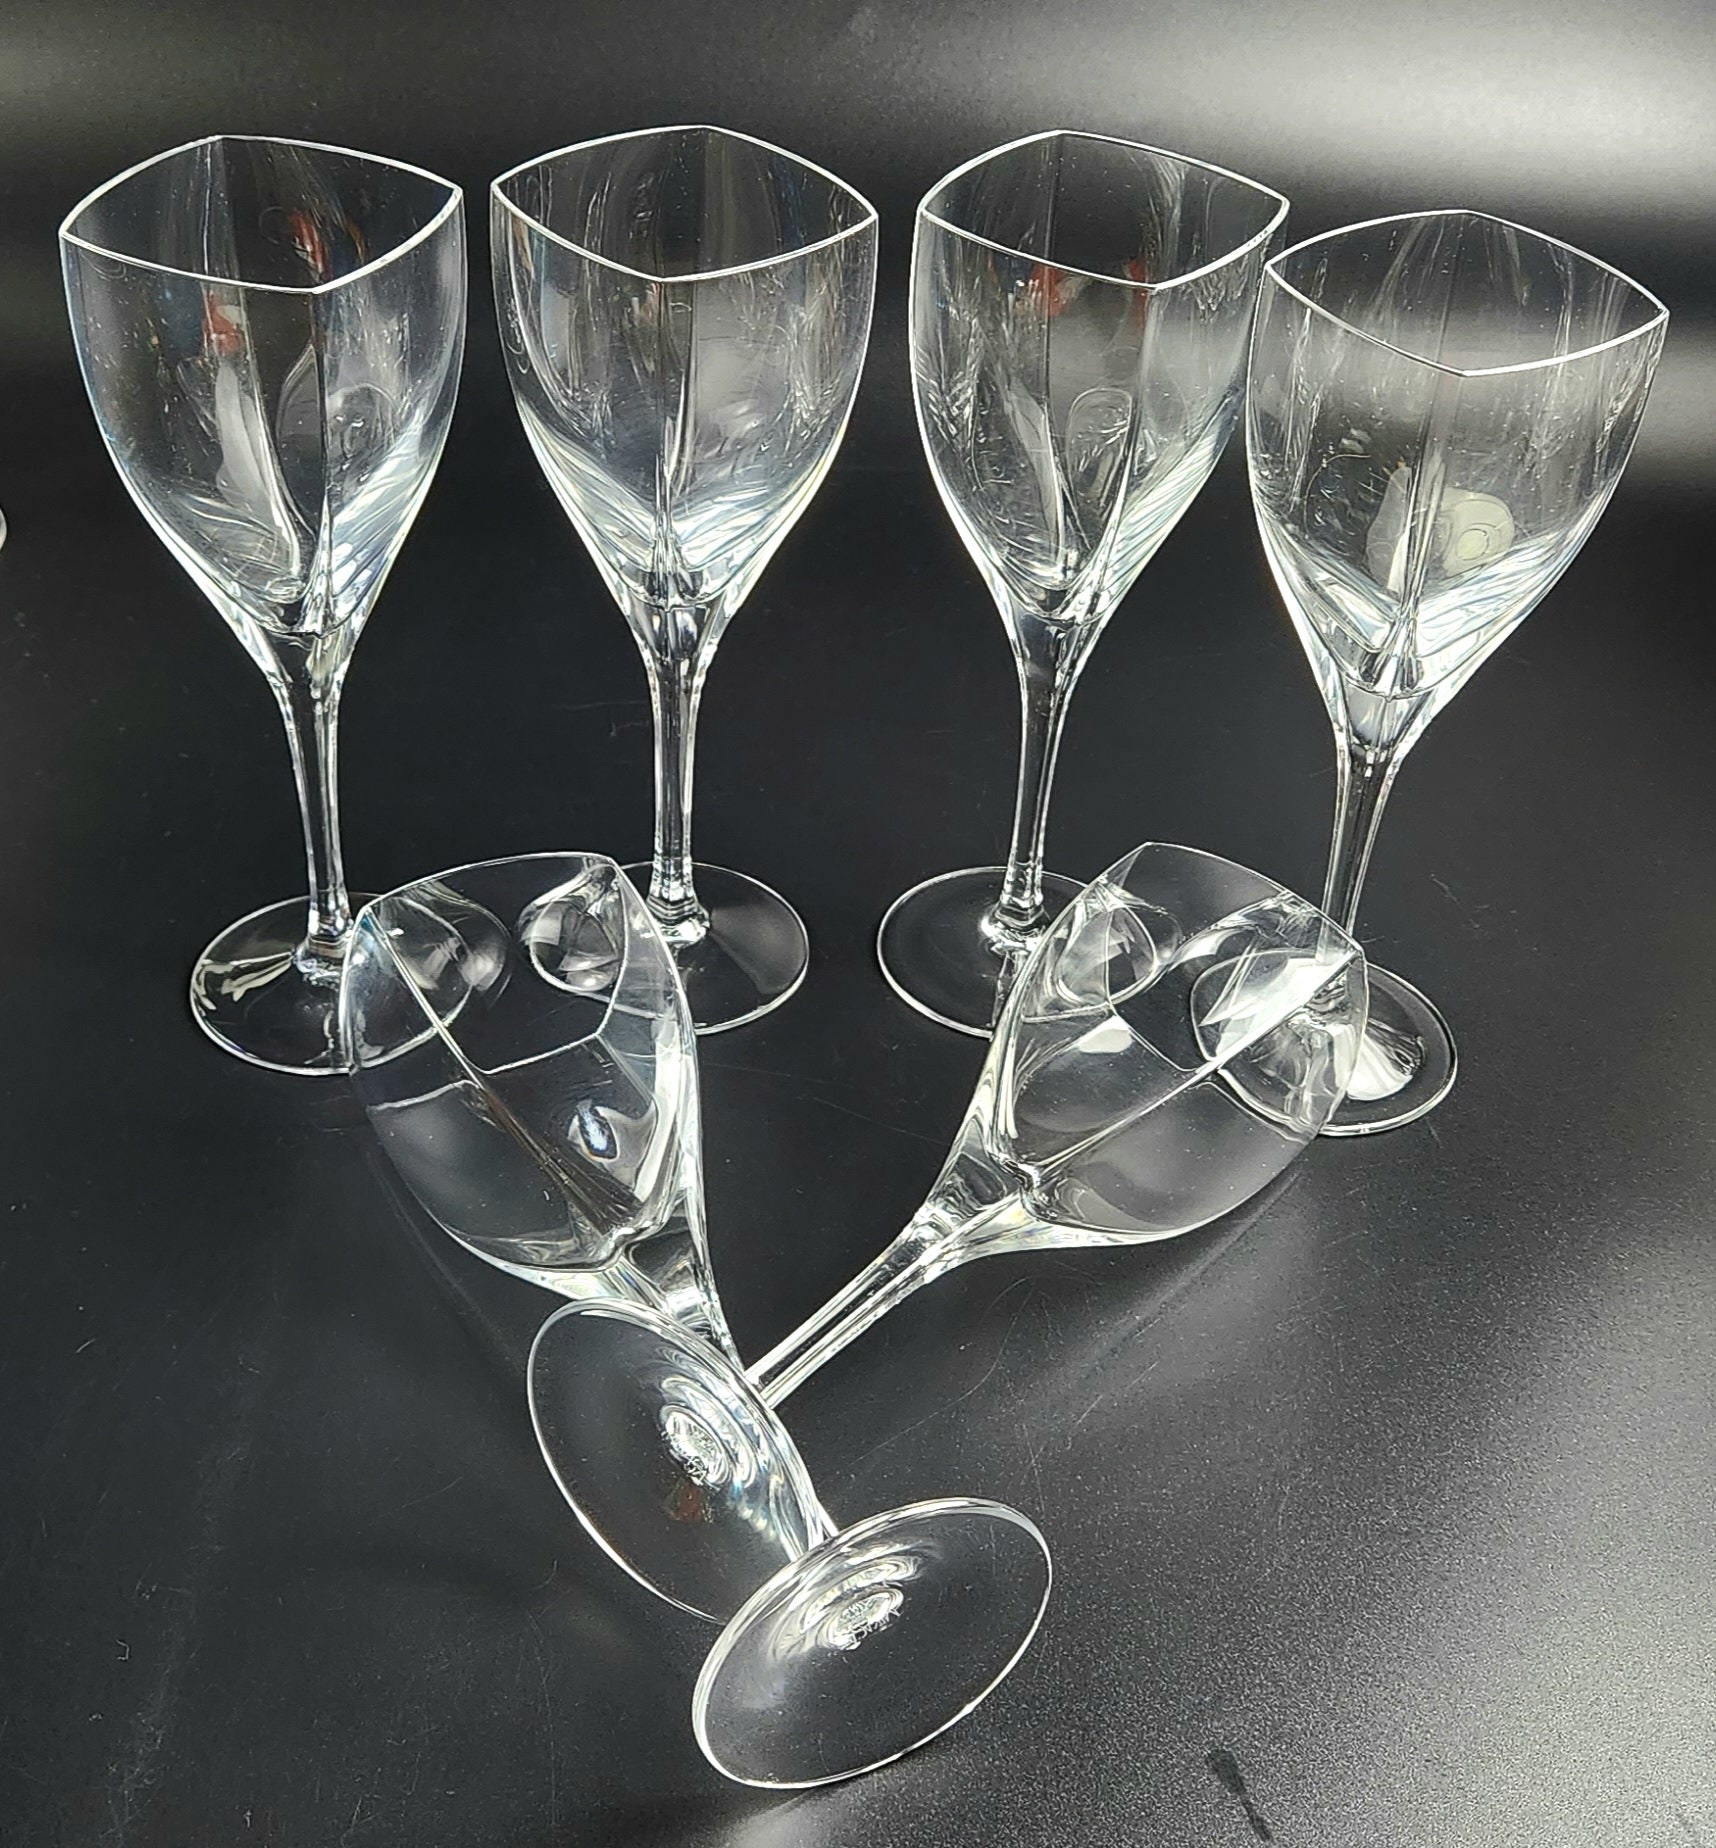 Mikasa Panache Clear Crystal Square Martini Glasses Set of 4 Made in France